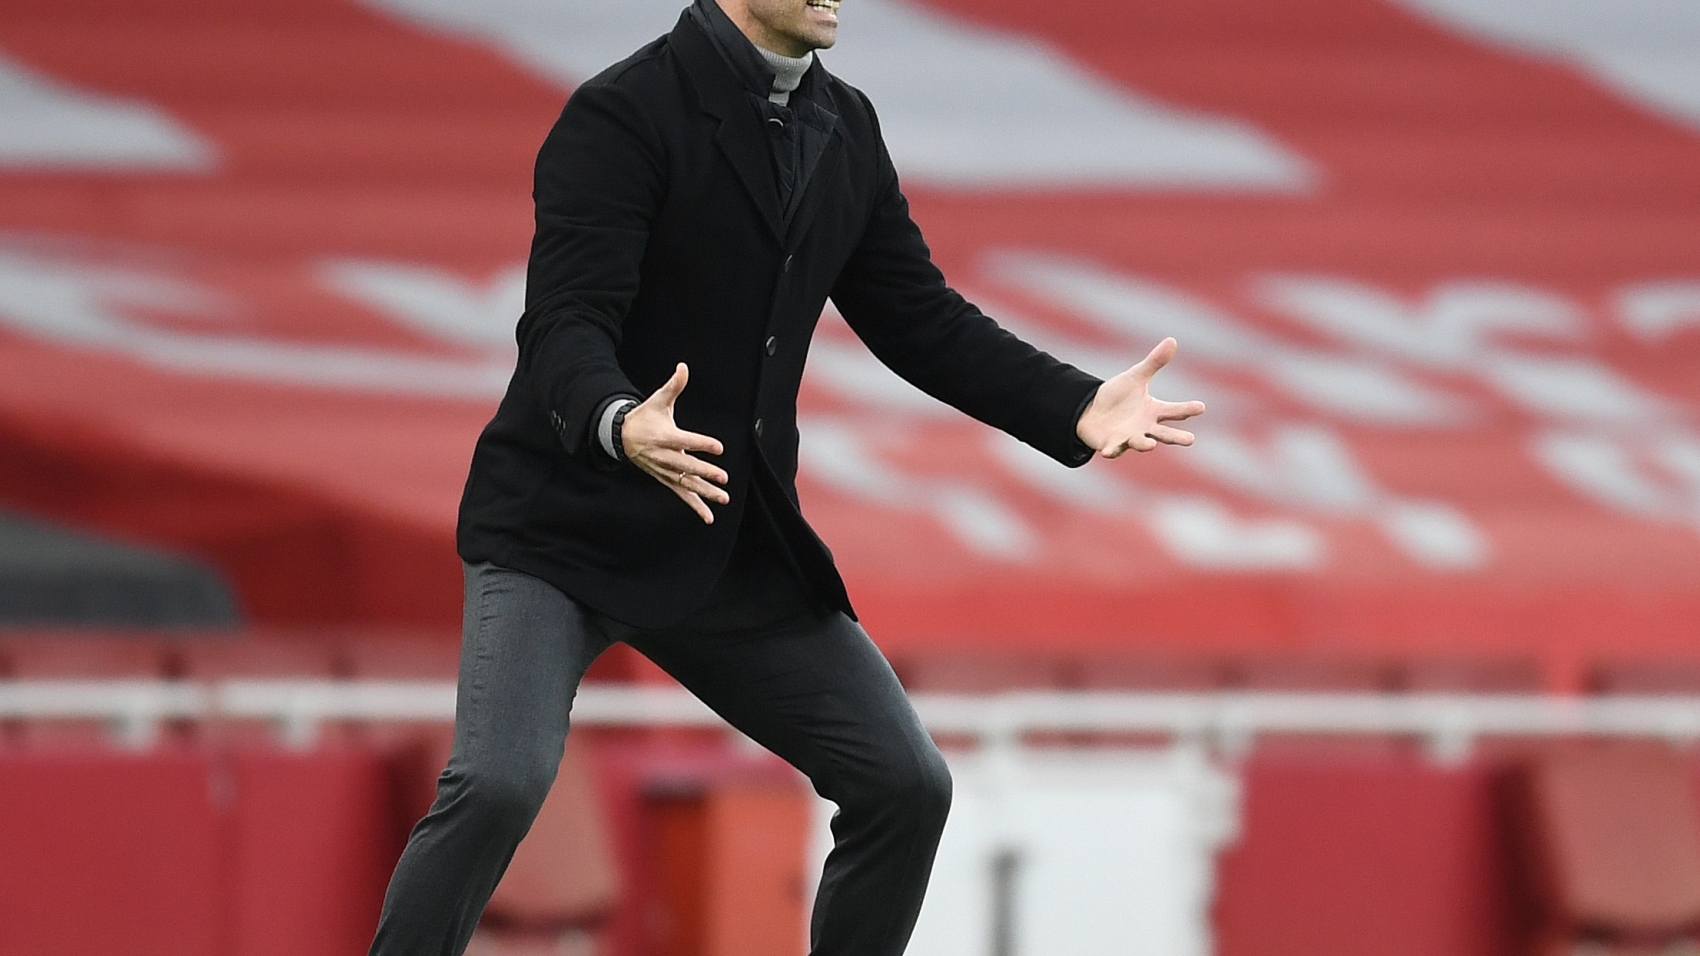 LONDON, ENGLAND - FEBRUARY 14: Arsenal manager Mikel Arteta during the Premier League match between Arsenal and Leeds United at Emirates Stadium on February 14, 2021 in London, England. (Photo by Stuart MacFarlane/Arsenal FC via Getty Images)